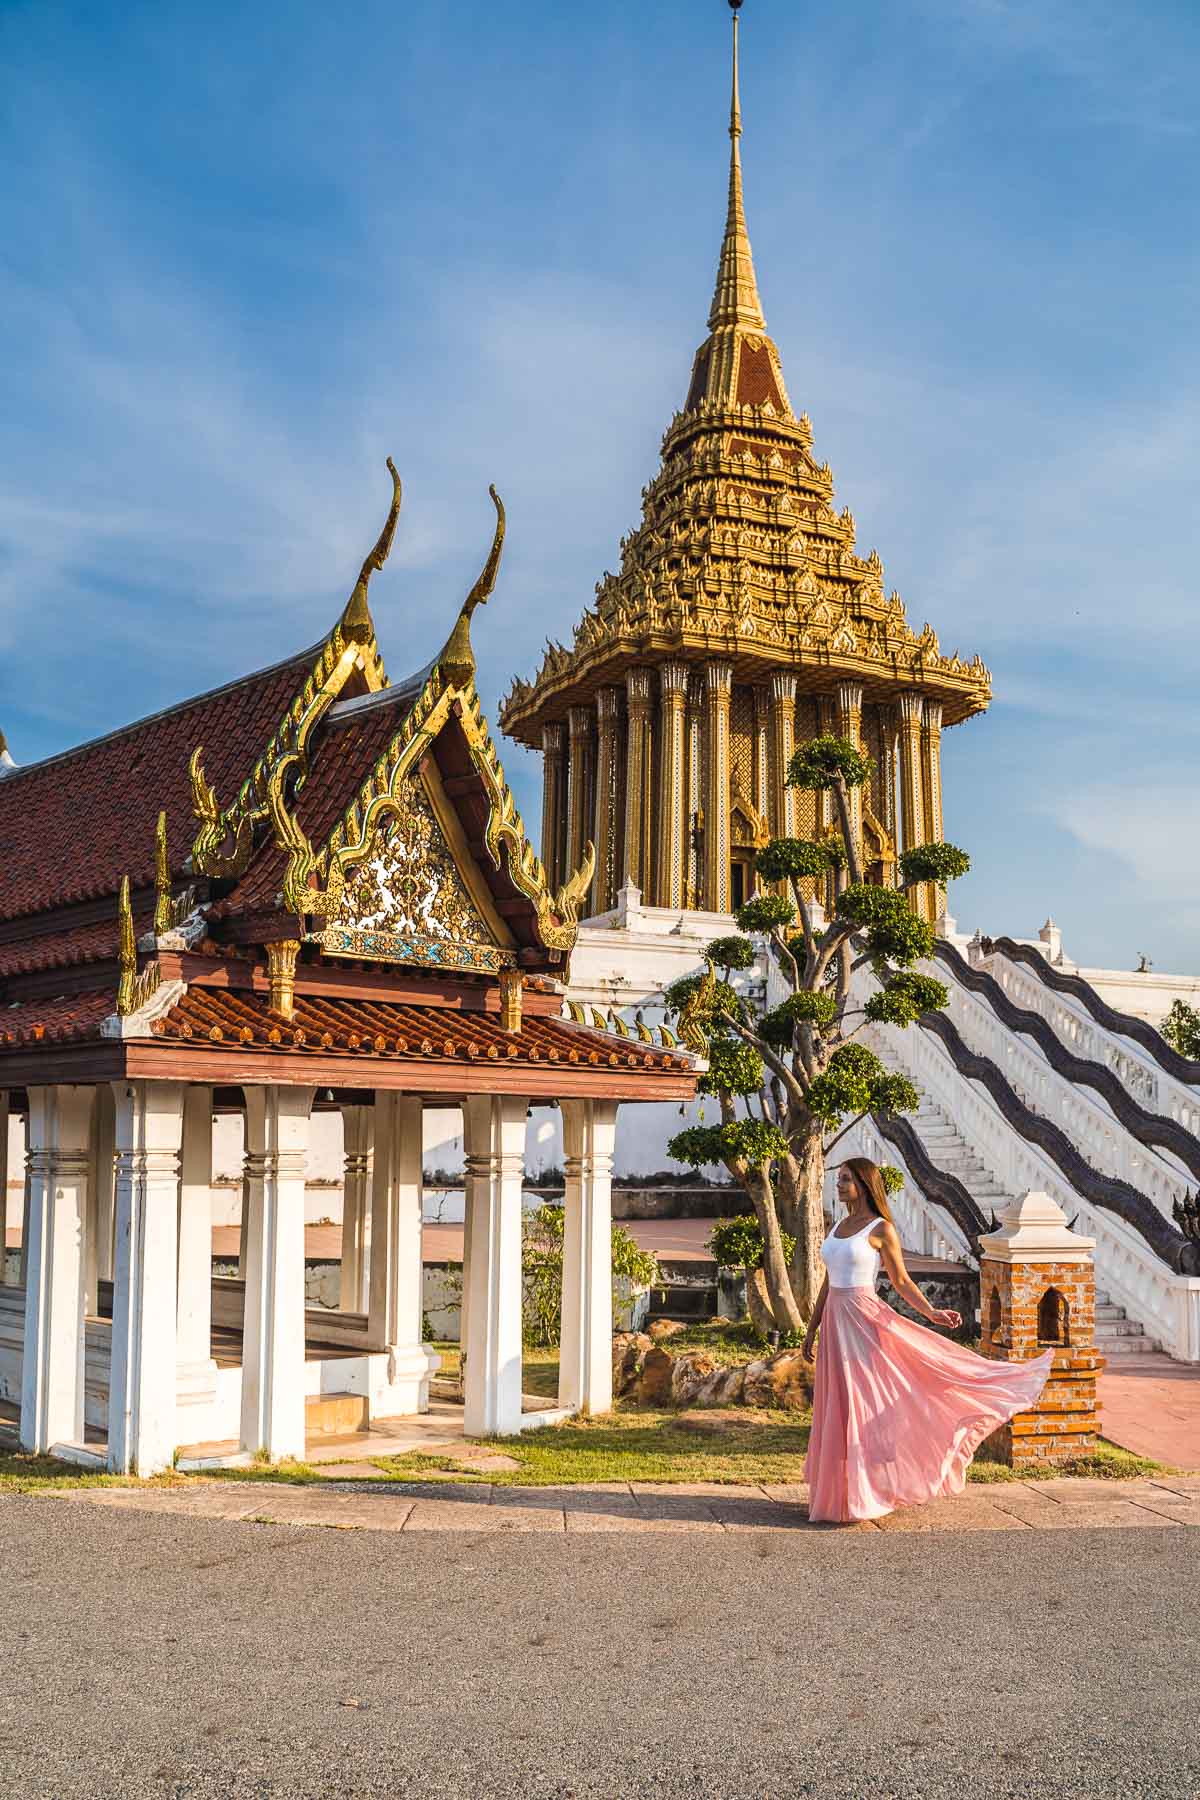 Girl in a pink dress standing in front of temples at the Ancient Siam Bangkok